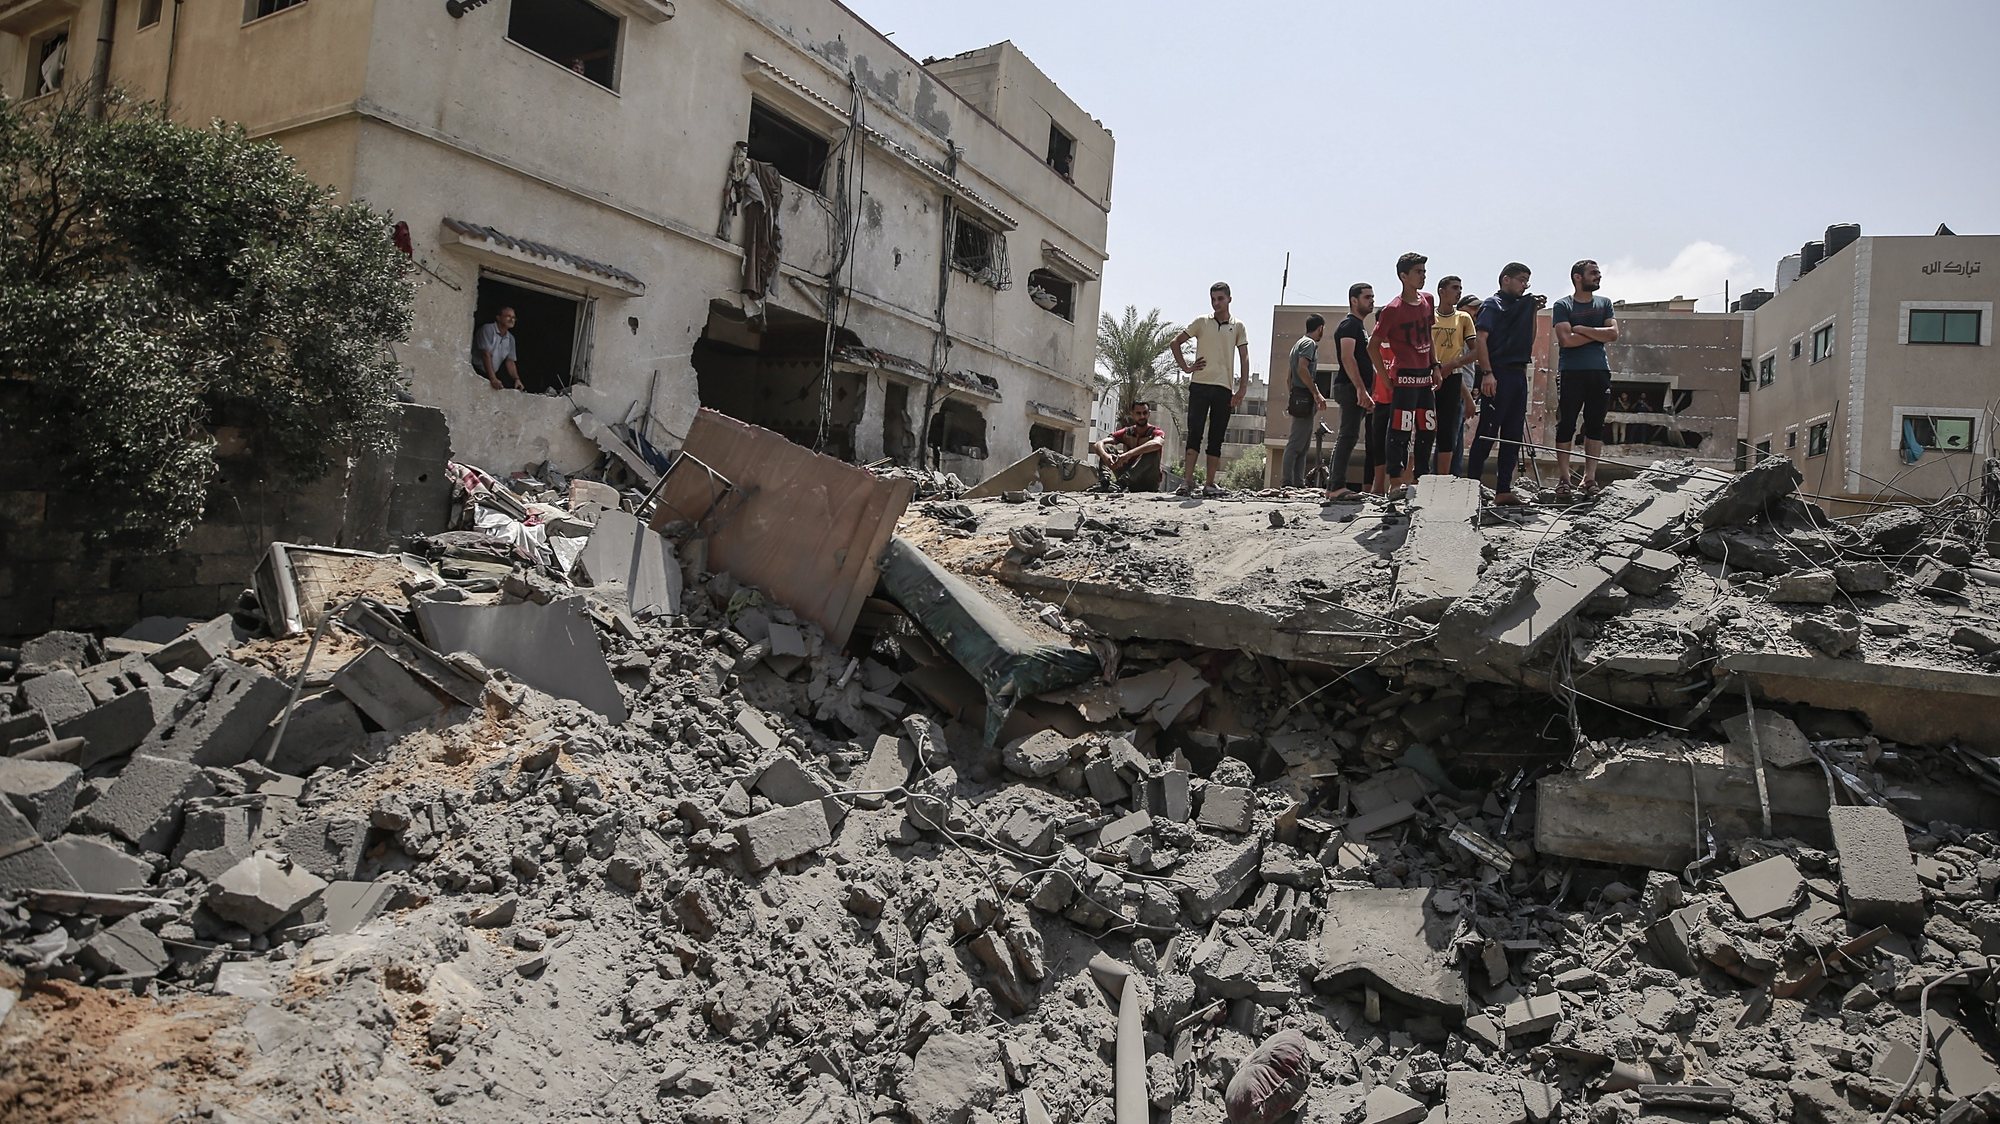 epa10108429 Palestinians inspect a destroyed house that belongs to Shamlakh family after Israeli air strikes in the south of Gaza City on, 06 August 2022. According to the Palestinian ministry of health, at least 10 people were killed, including a child, in a series of Israeli airstrikes on multiple targets in the Gaza Strip including a residential apartment in neighborhood of Al-Rimal. Al-Quds Brigades, the armed wing of the Palestinian Islamic Jihad, announced that senior leader Tayseer al-Jabari was killed in the attacks.  EPA/MOHAMMED SABER